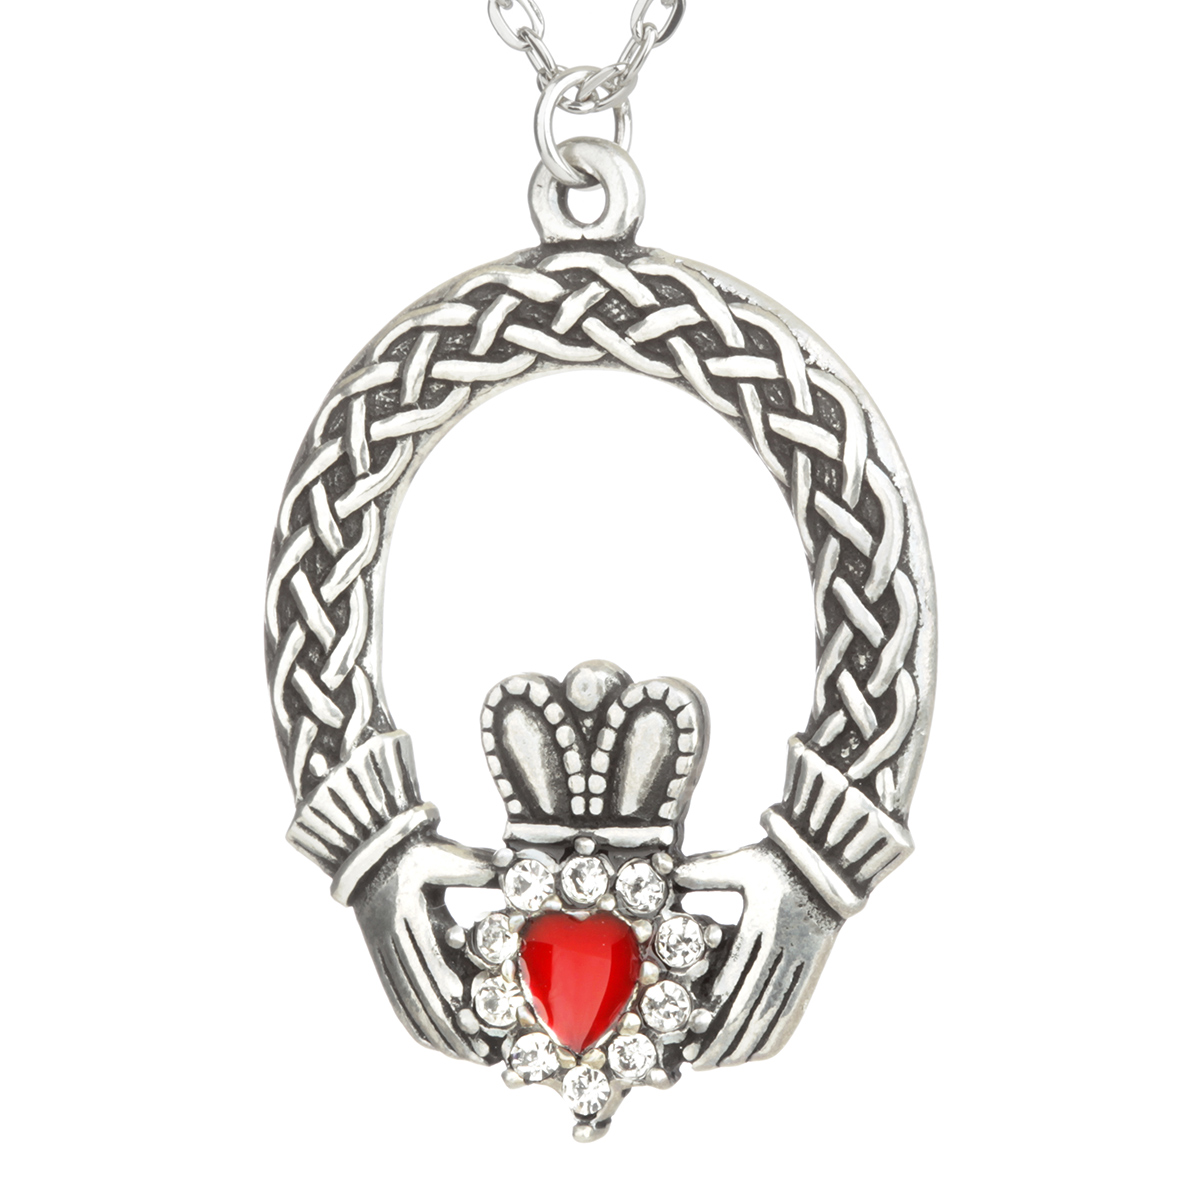 Crystal Claddagh Ring Kette mit Emaille & Kristall